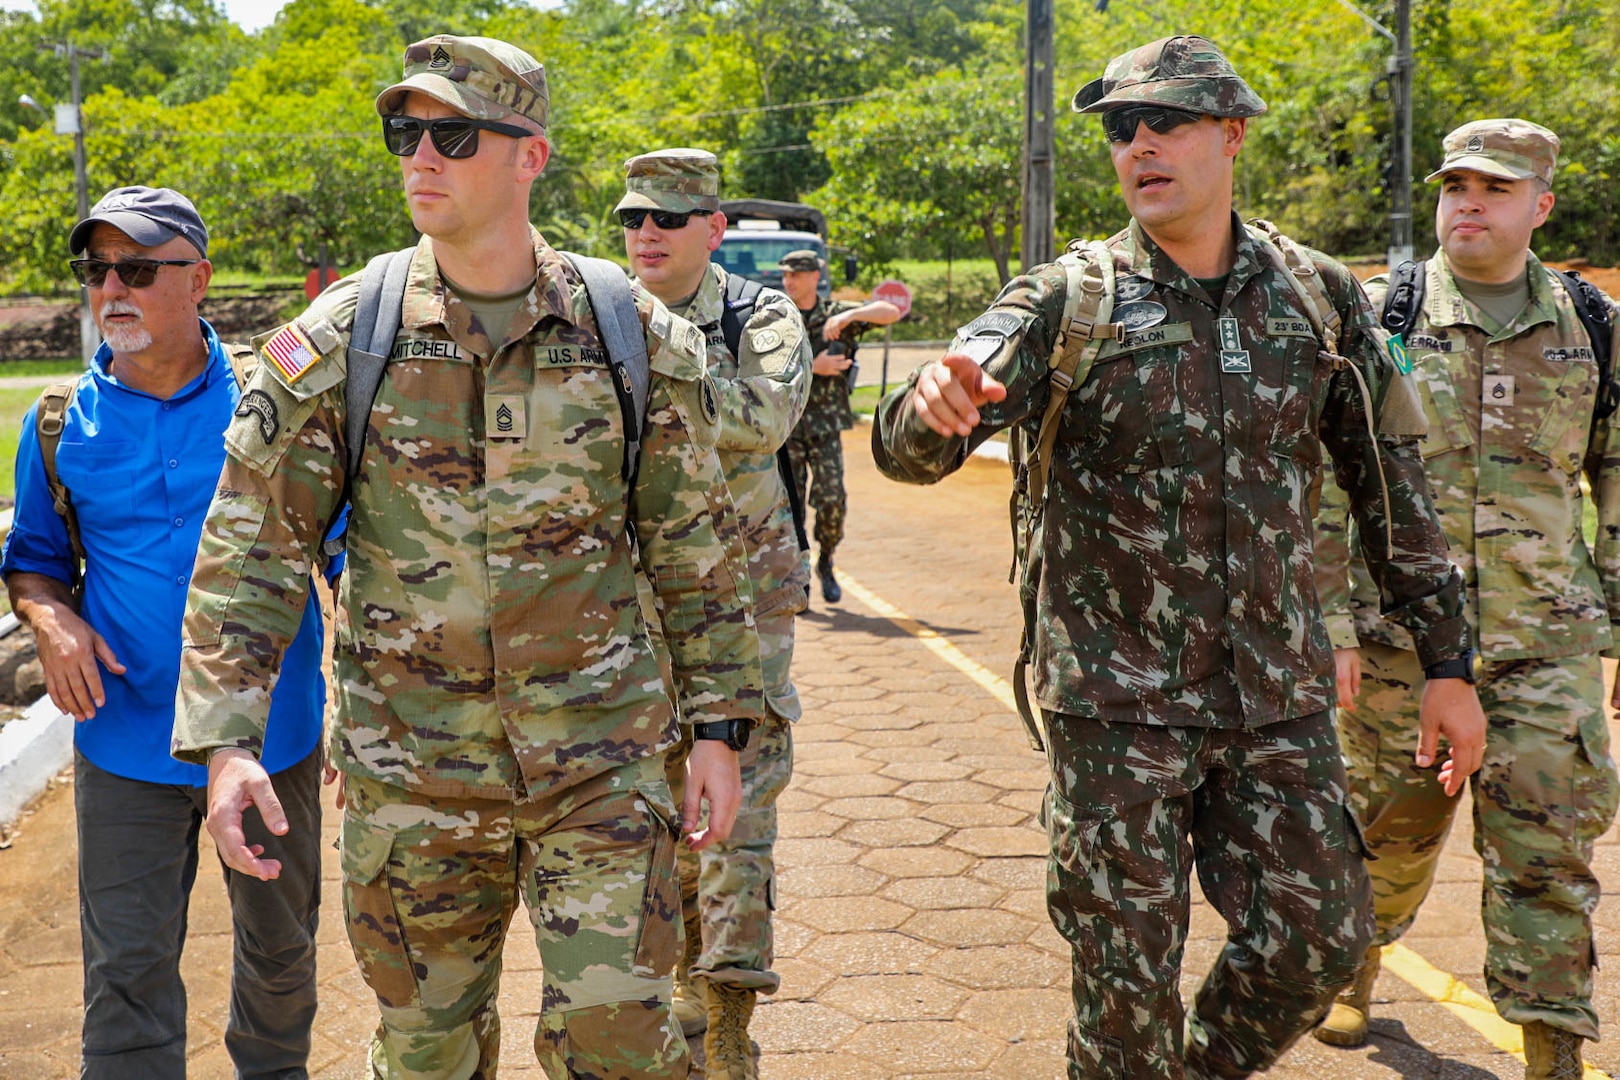 Brazilian Army to Participate in CORE 22 Exercise in the United States -  Diálogo Américas